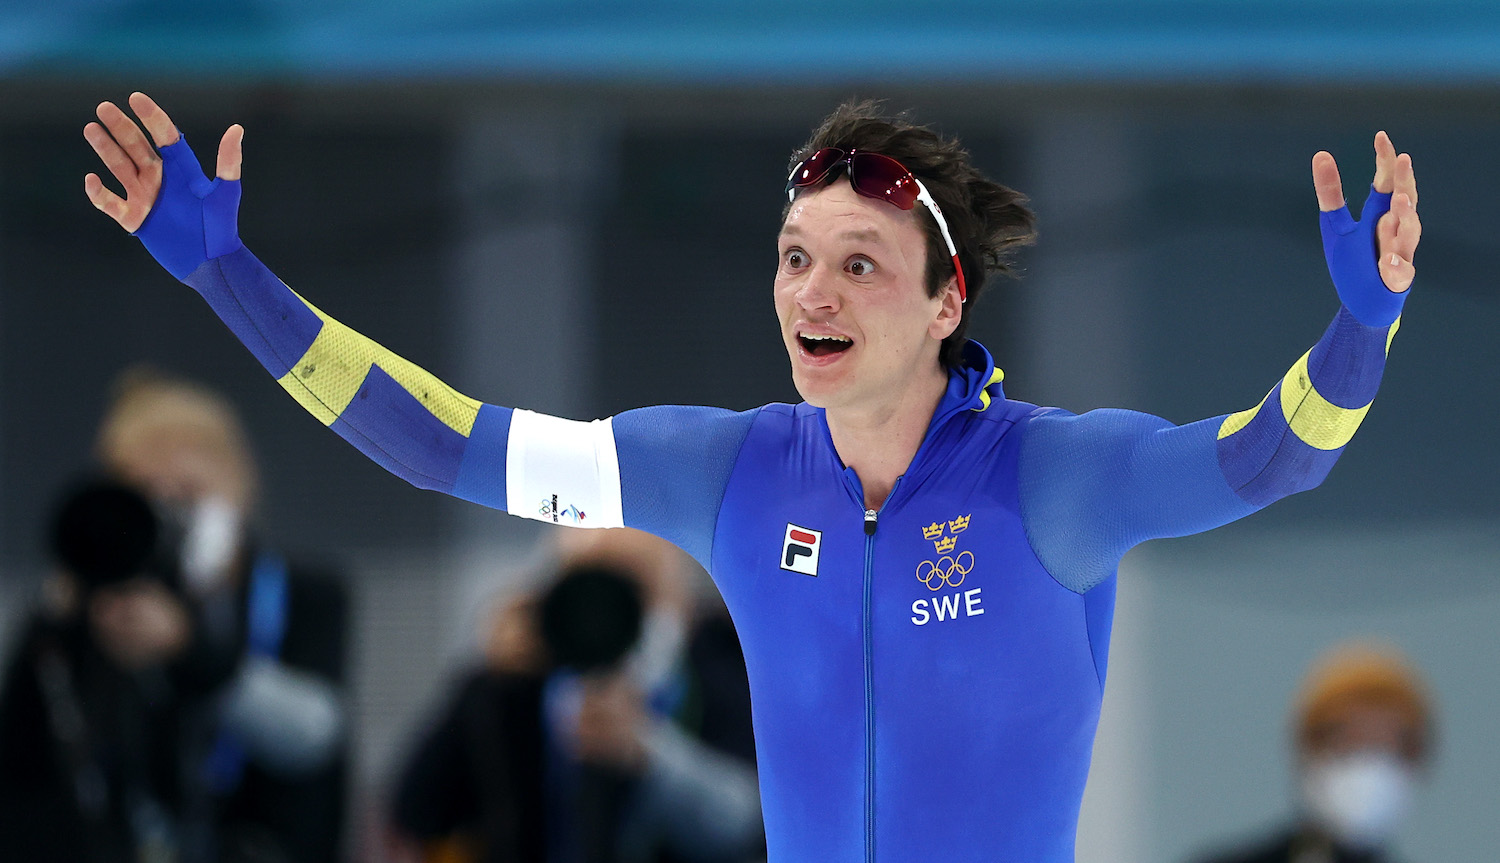 BEIJING, CHINA - FEBRUARY 06: Nils van der Poel of Team Sweden celebrates winning the Gold Medal and setting a new Olympic record time of 6:08.84 during the Men's 5000m on day two of the Beijing 2022 Winter Olympic Games at National Speed Skating Oval on February 06, 2022 in Beijing, China. (Photo by Dean Mouhtaropoulos/Getty Images)